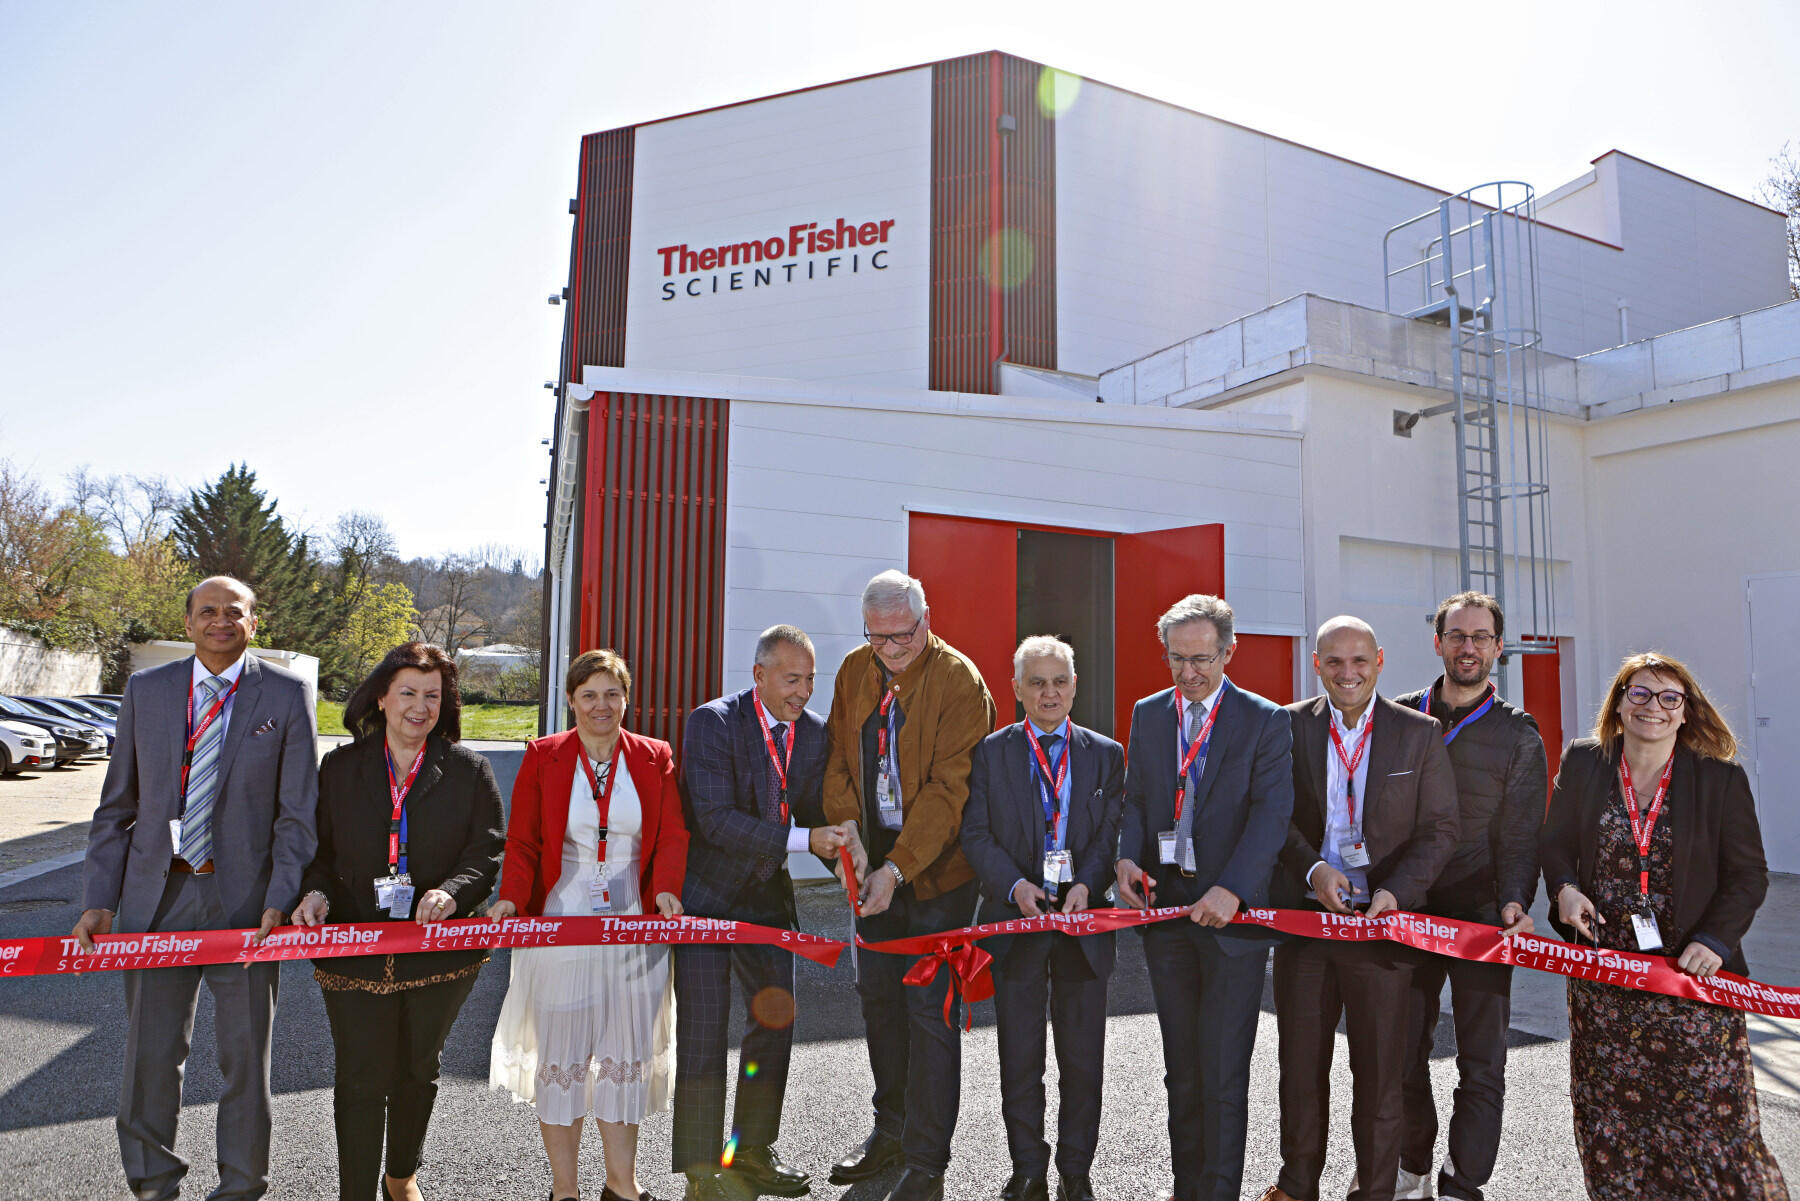 Thermo Fisher Scientific celebrated the opening of its early development hub in Bourgoin, France, enabling the site to support customers in oral solid dose formulations from early drug development through commercial manufacturing.  Pictured from left to right: Anil Kane, senior director of global technical and scientific affairs, pharma services; Hrissi Samartzidou, vice president of marketing, pharma services; Isabelle Lafosse-Marin, senior director and general manager, Bourgoin site;  Leon Wyszkowski, president of commercial operations, pharma services; Denis Giraud, Mayor of Ruy; Jean-Pierre Girard, Regional Councilor and first assistant of Mayor of Bourgoin-Jallieu; Jean Papadopulo, President of Intermunicipal organization of Isère (CAPI); Christophe Carron, President of Chamber of Commerce and Industry (CCI); and Clément Herboux-Dubois, Parliamentary Collaborator of the Deputy. 